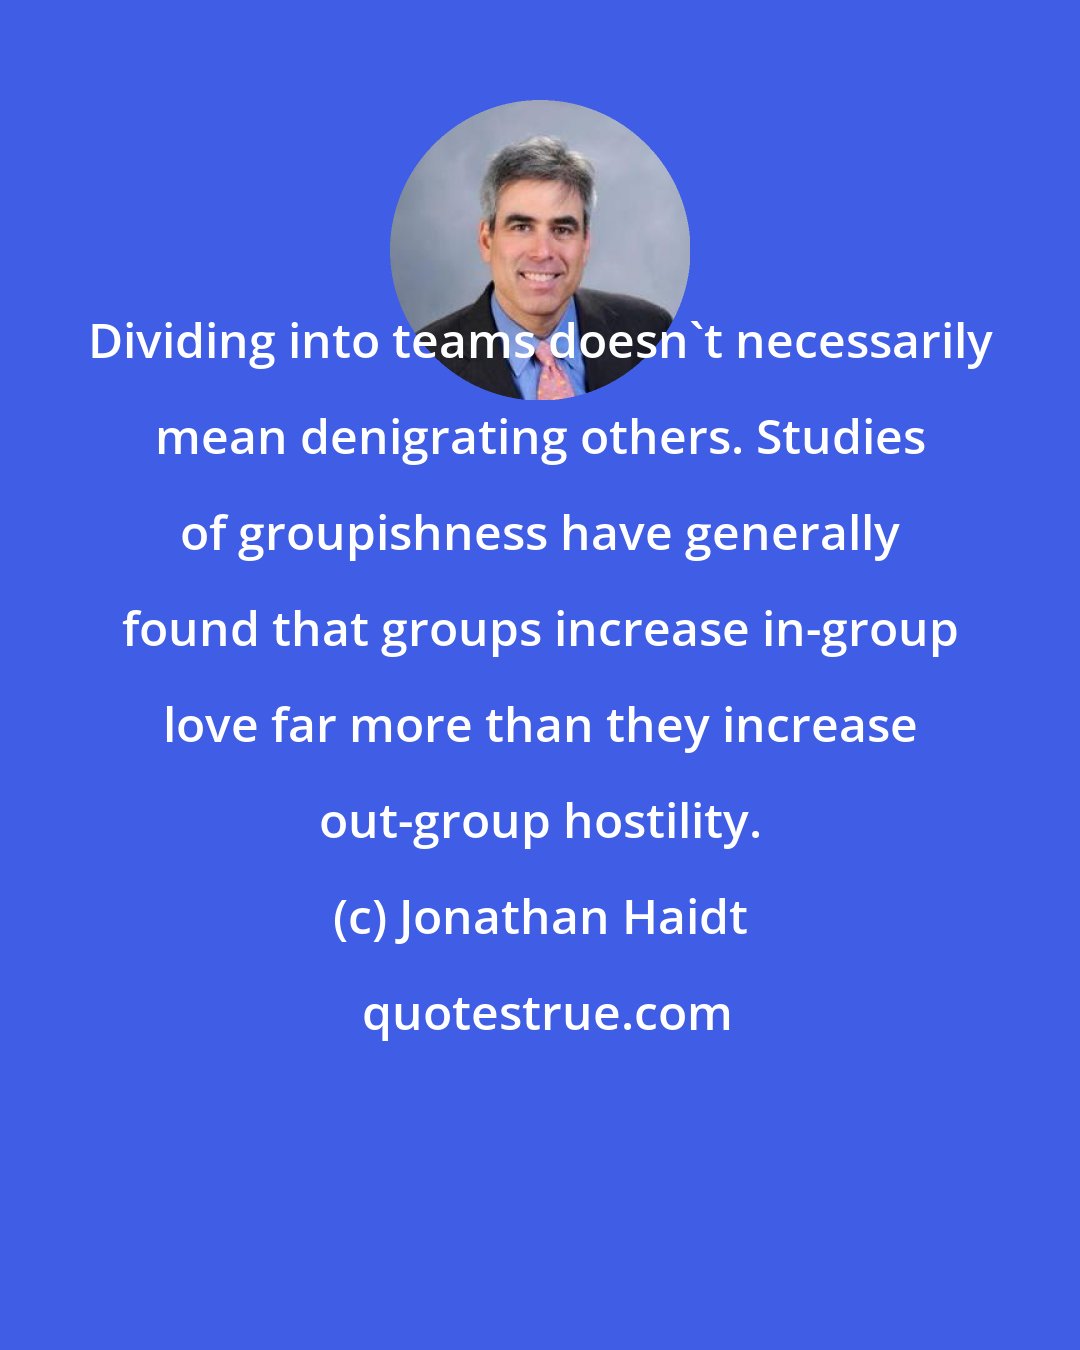 Jonathan Haidt: Dividing into teams doesn't necessarily mean denigrating others. Studies of groupishness have generally found that groups increase in-group love far more than they increase out-group hostility.